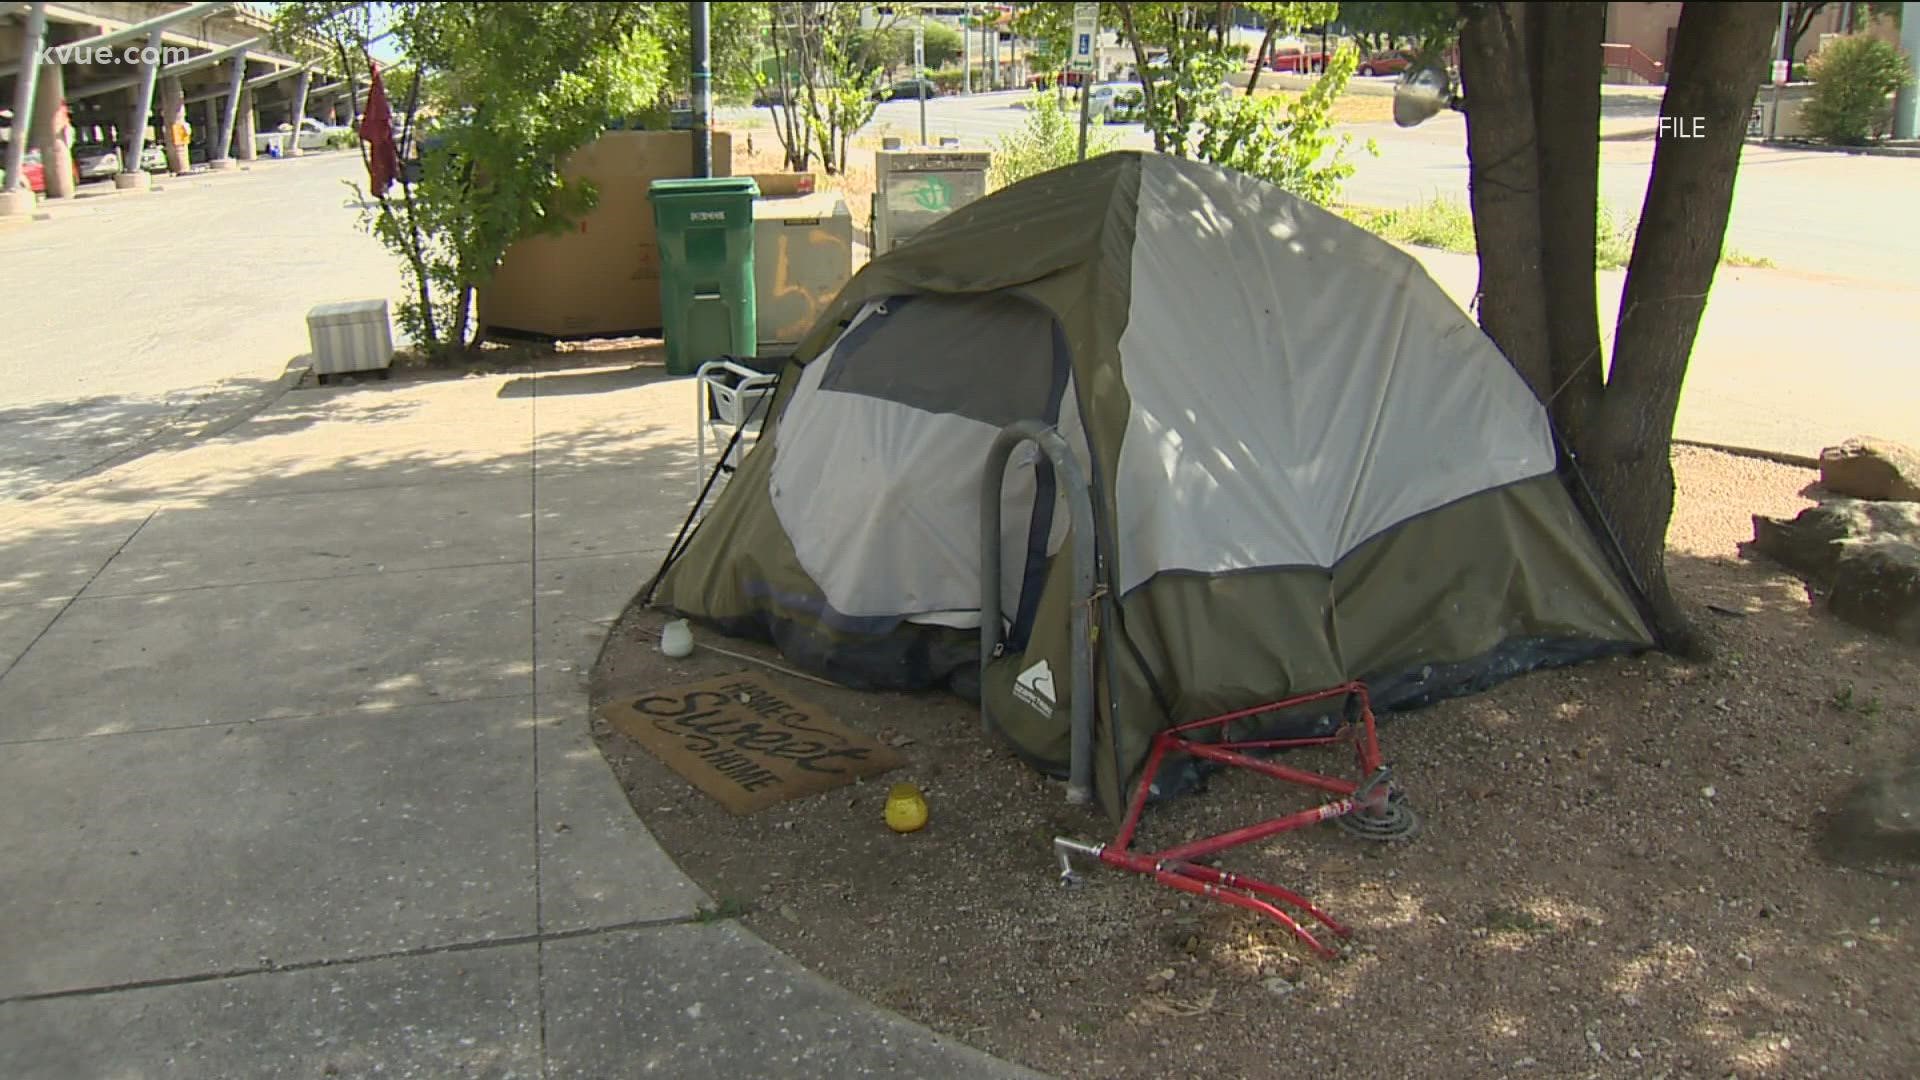 In response to the report, the City said it will work on ways to track homelessness spending across all departments.